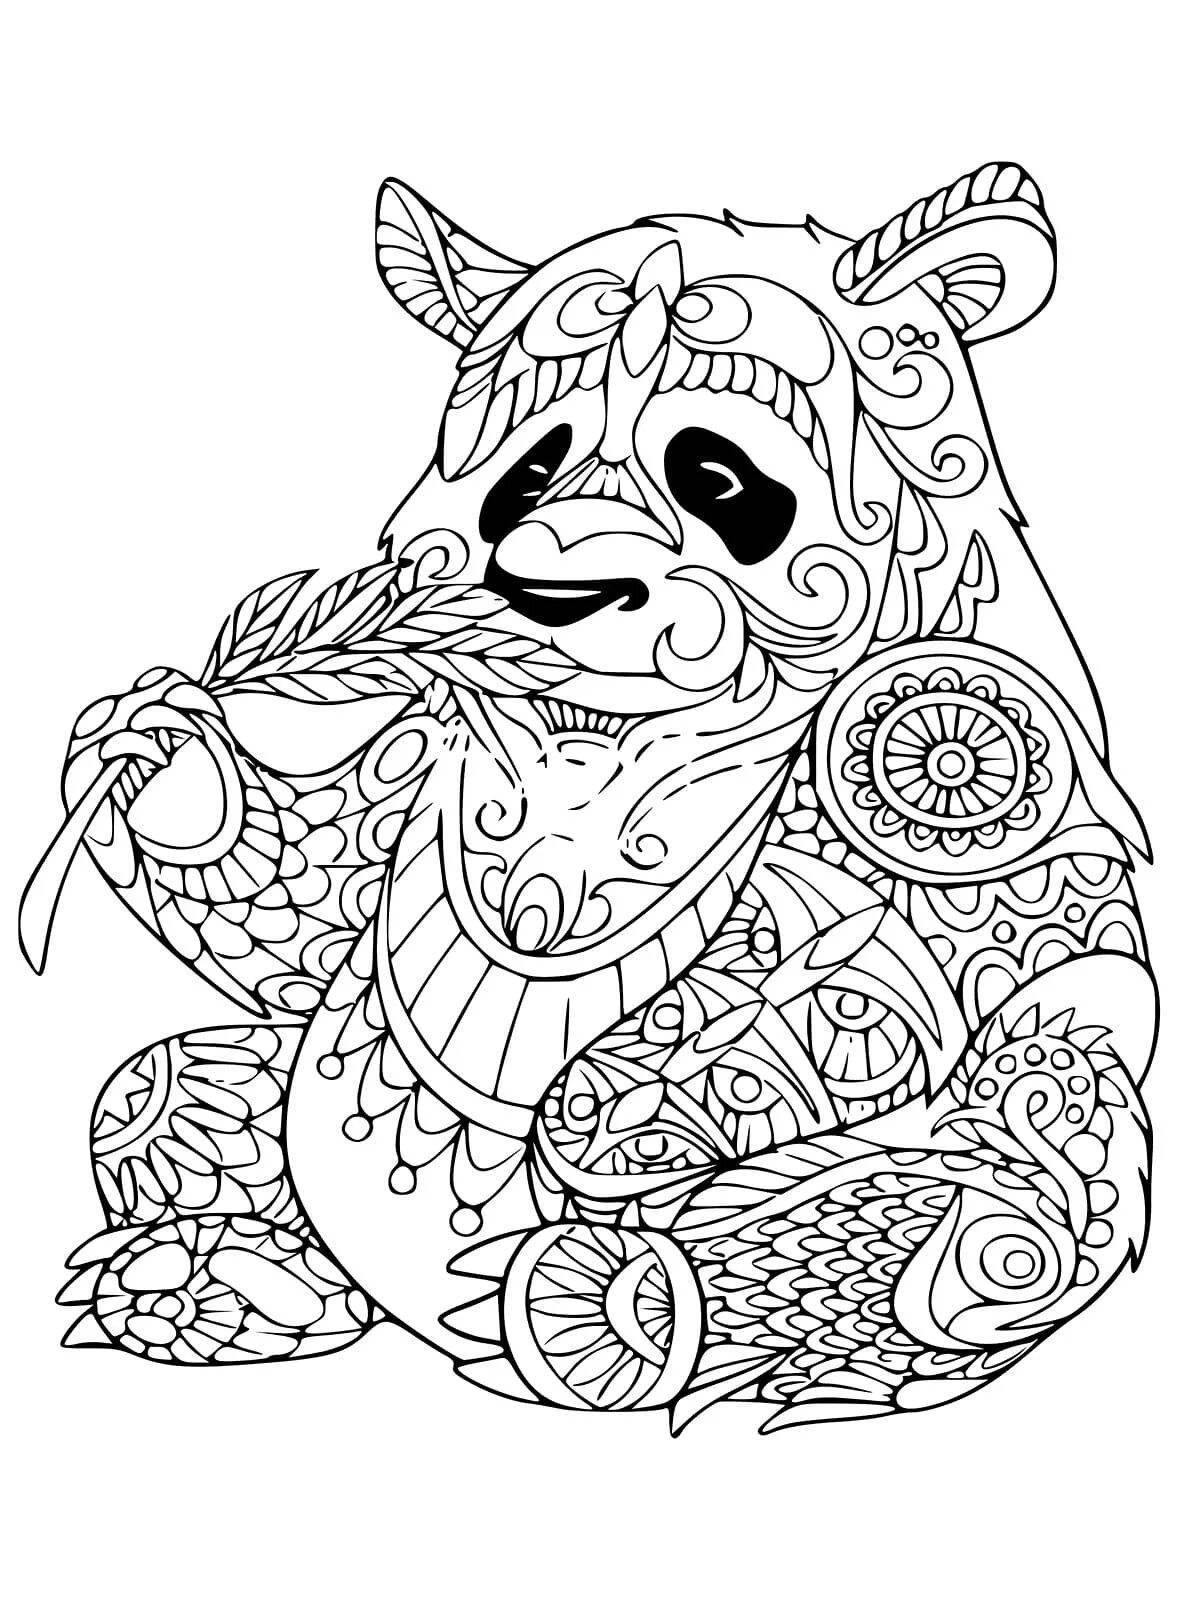 Adorable anti-stress coloring book for 8 year olds